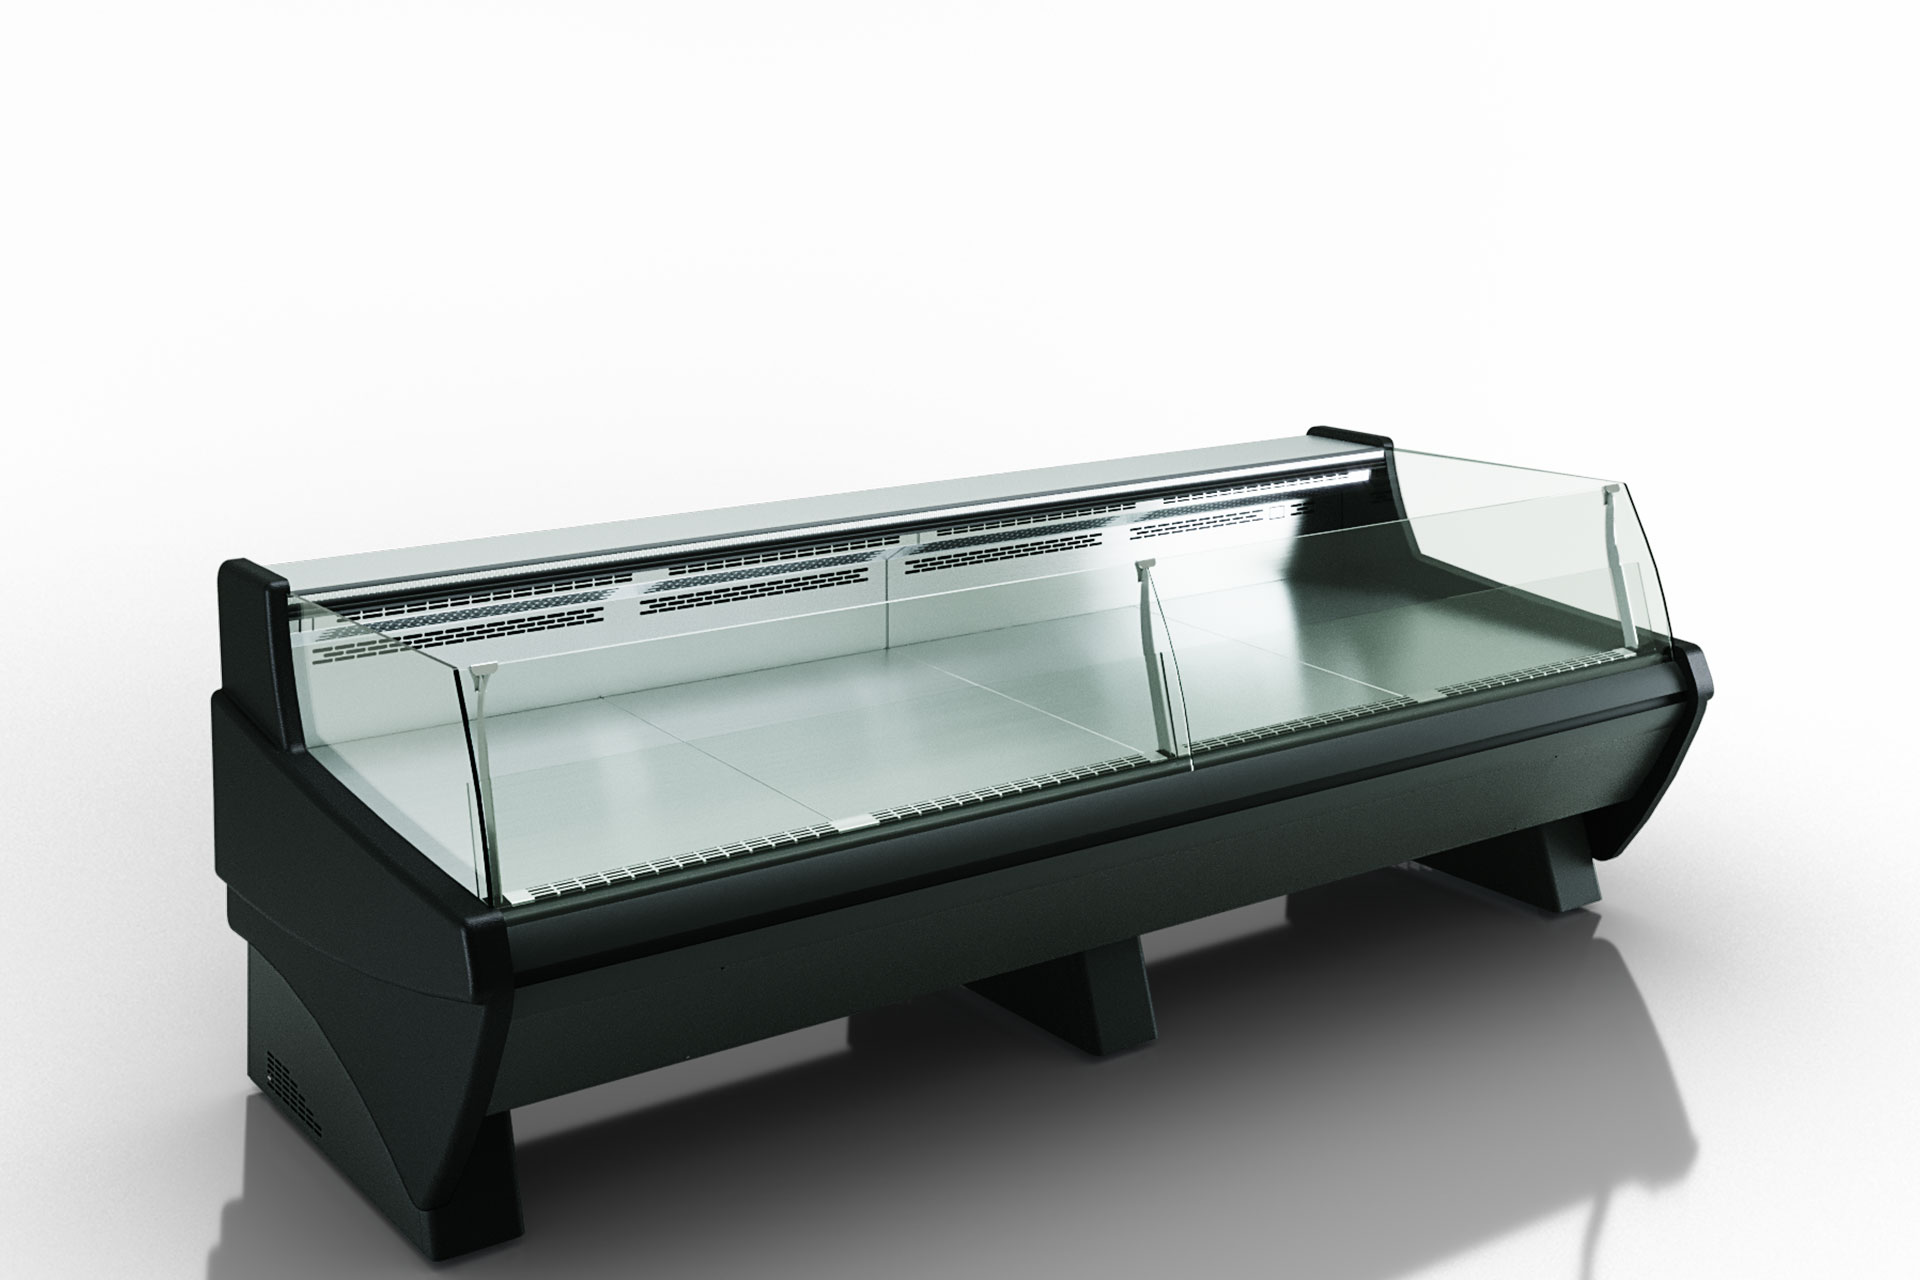 Counter Symphony luxe MG 100 deli self 085-DLM